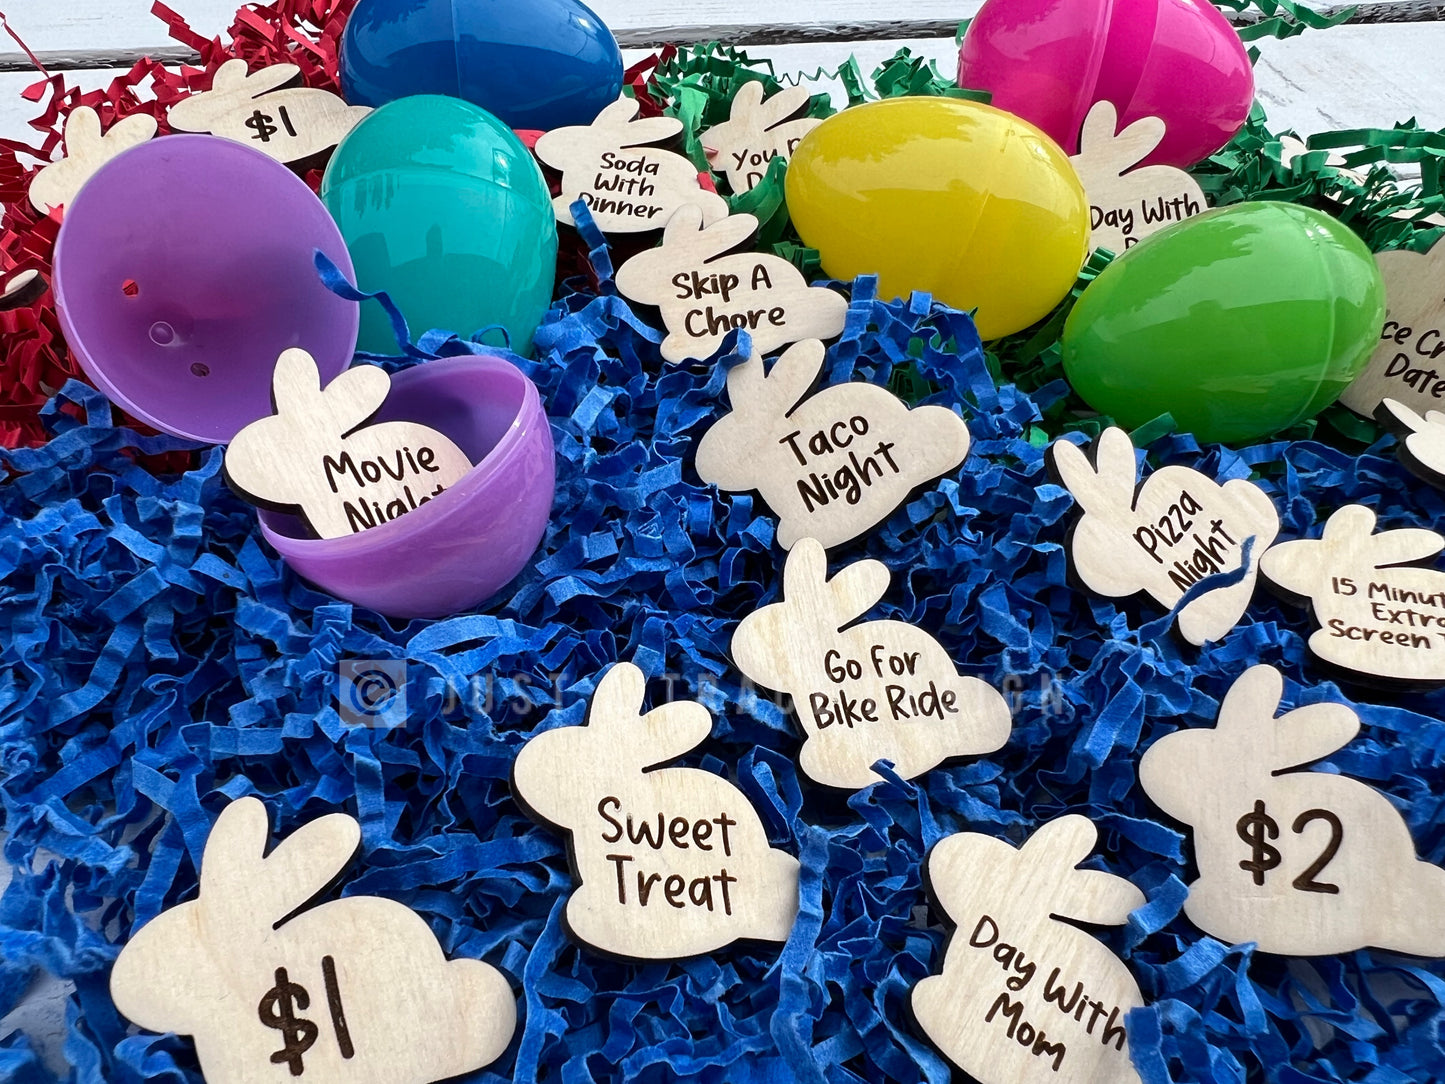 Wooden Easter Egg Tokens 20 Per Set Reusable Bunny Shaped - Egg Hunt Non Candy Eggs Prize Reward Eggs Easter Holiday - Eggs Activity Tokens